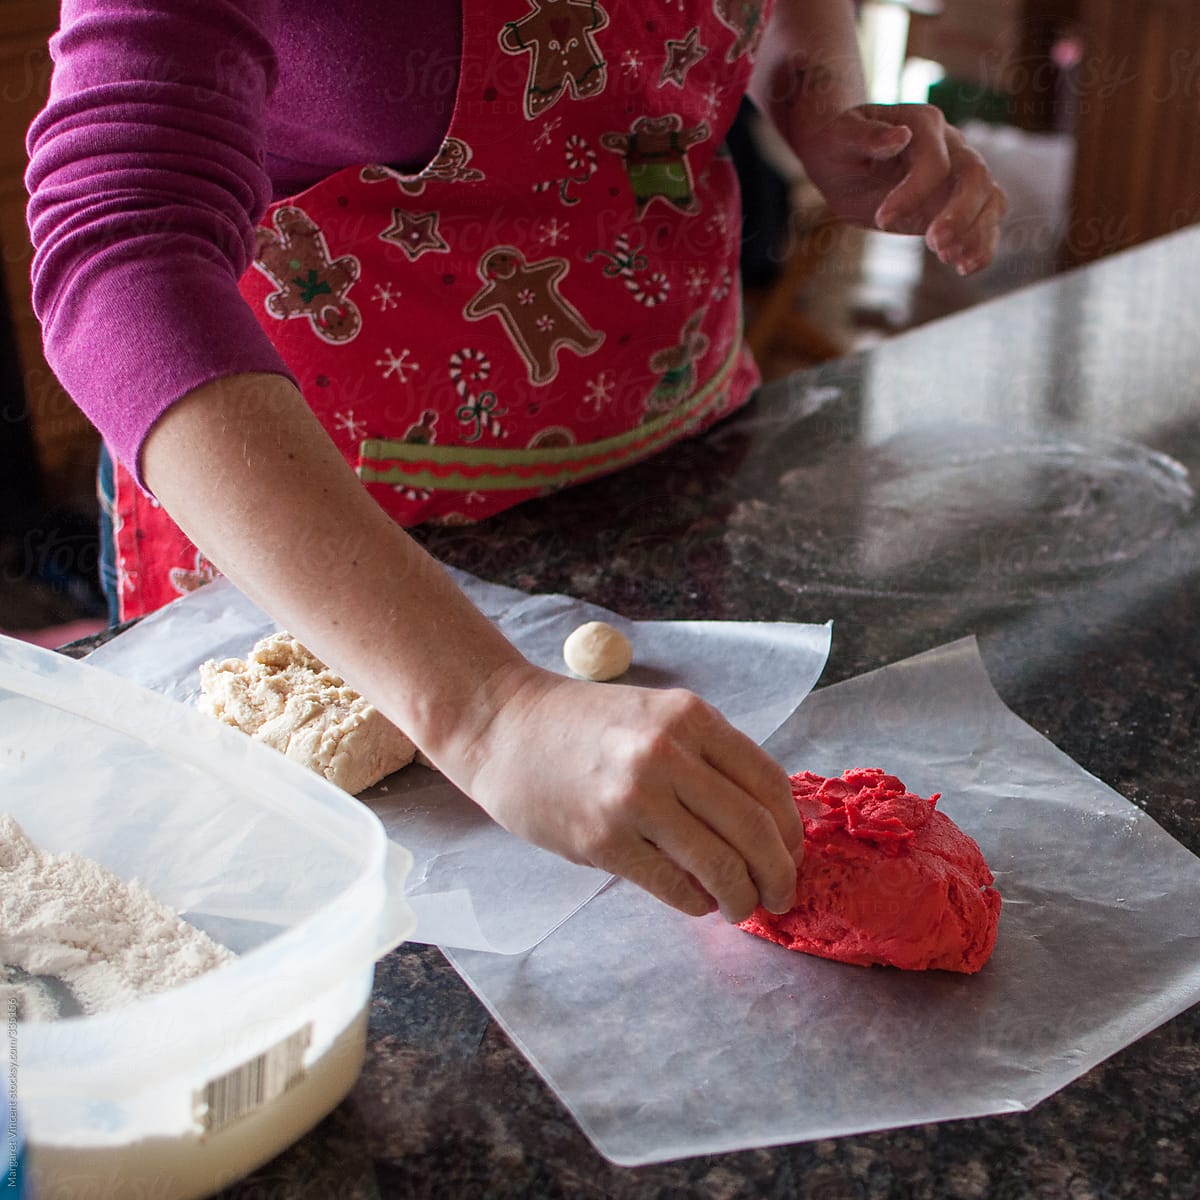 making cookies: preparing the dough for twisting